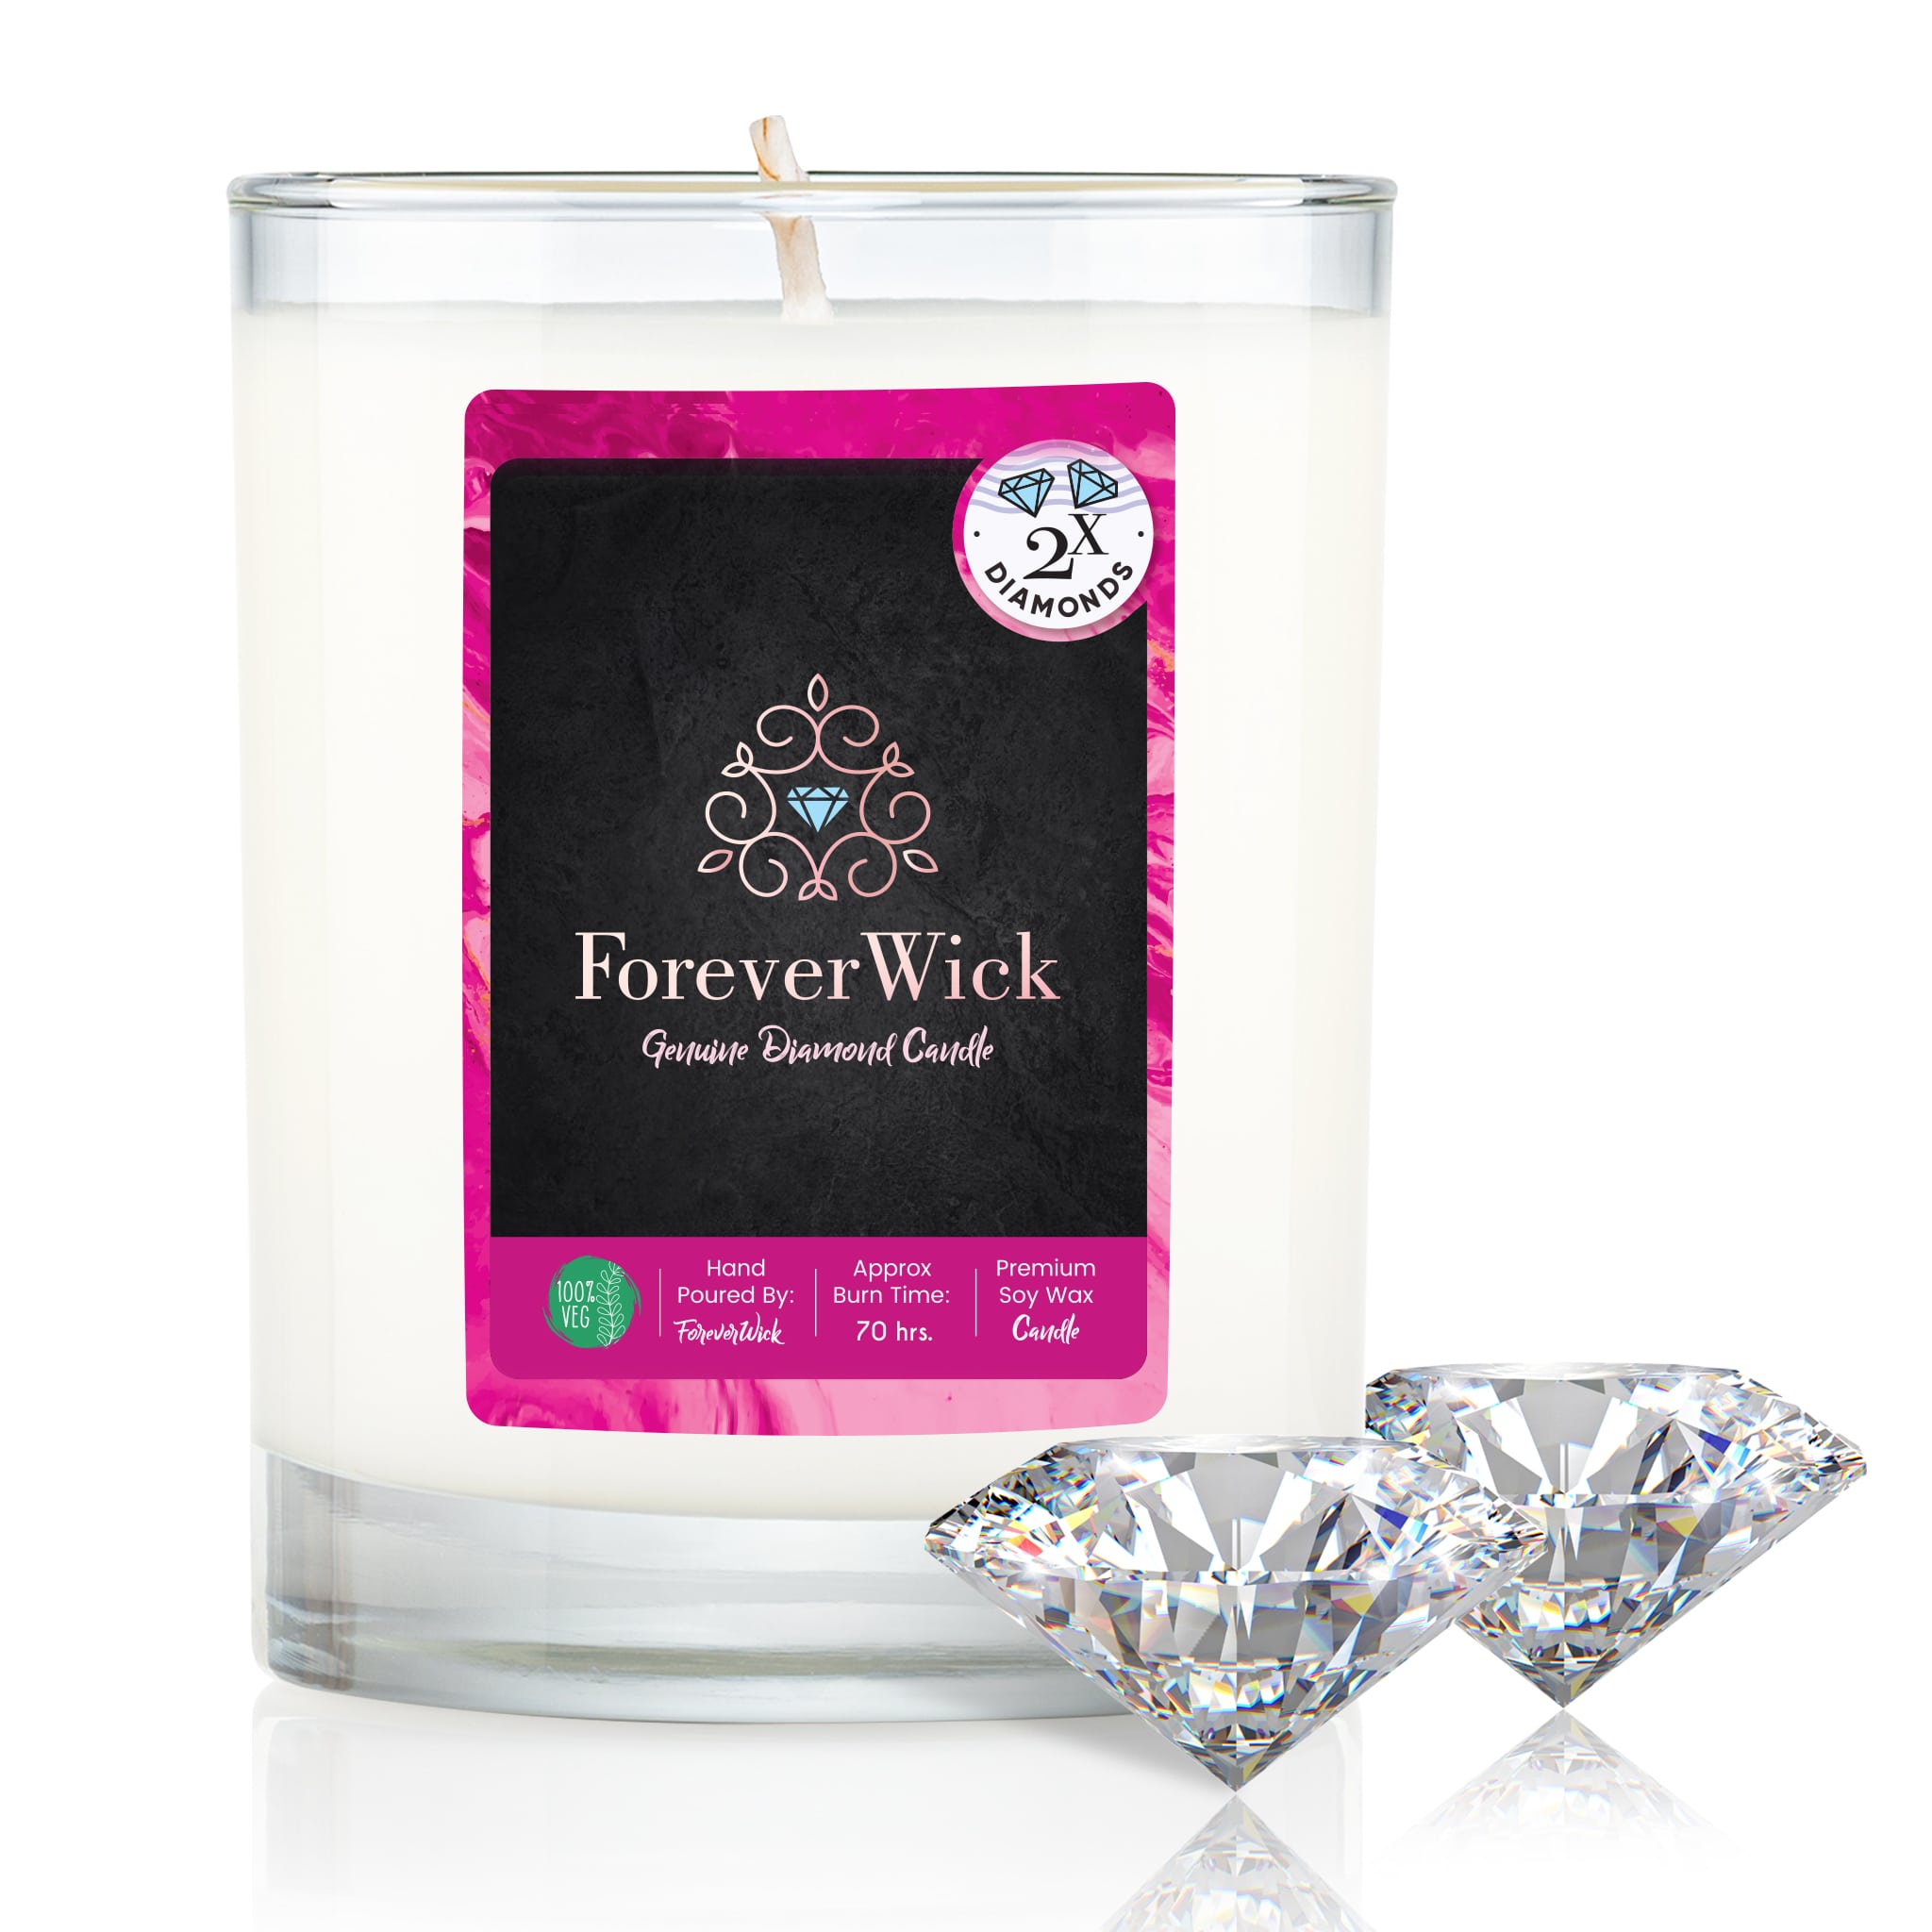 The ForeverWick Double Diamond Candle